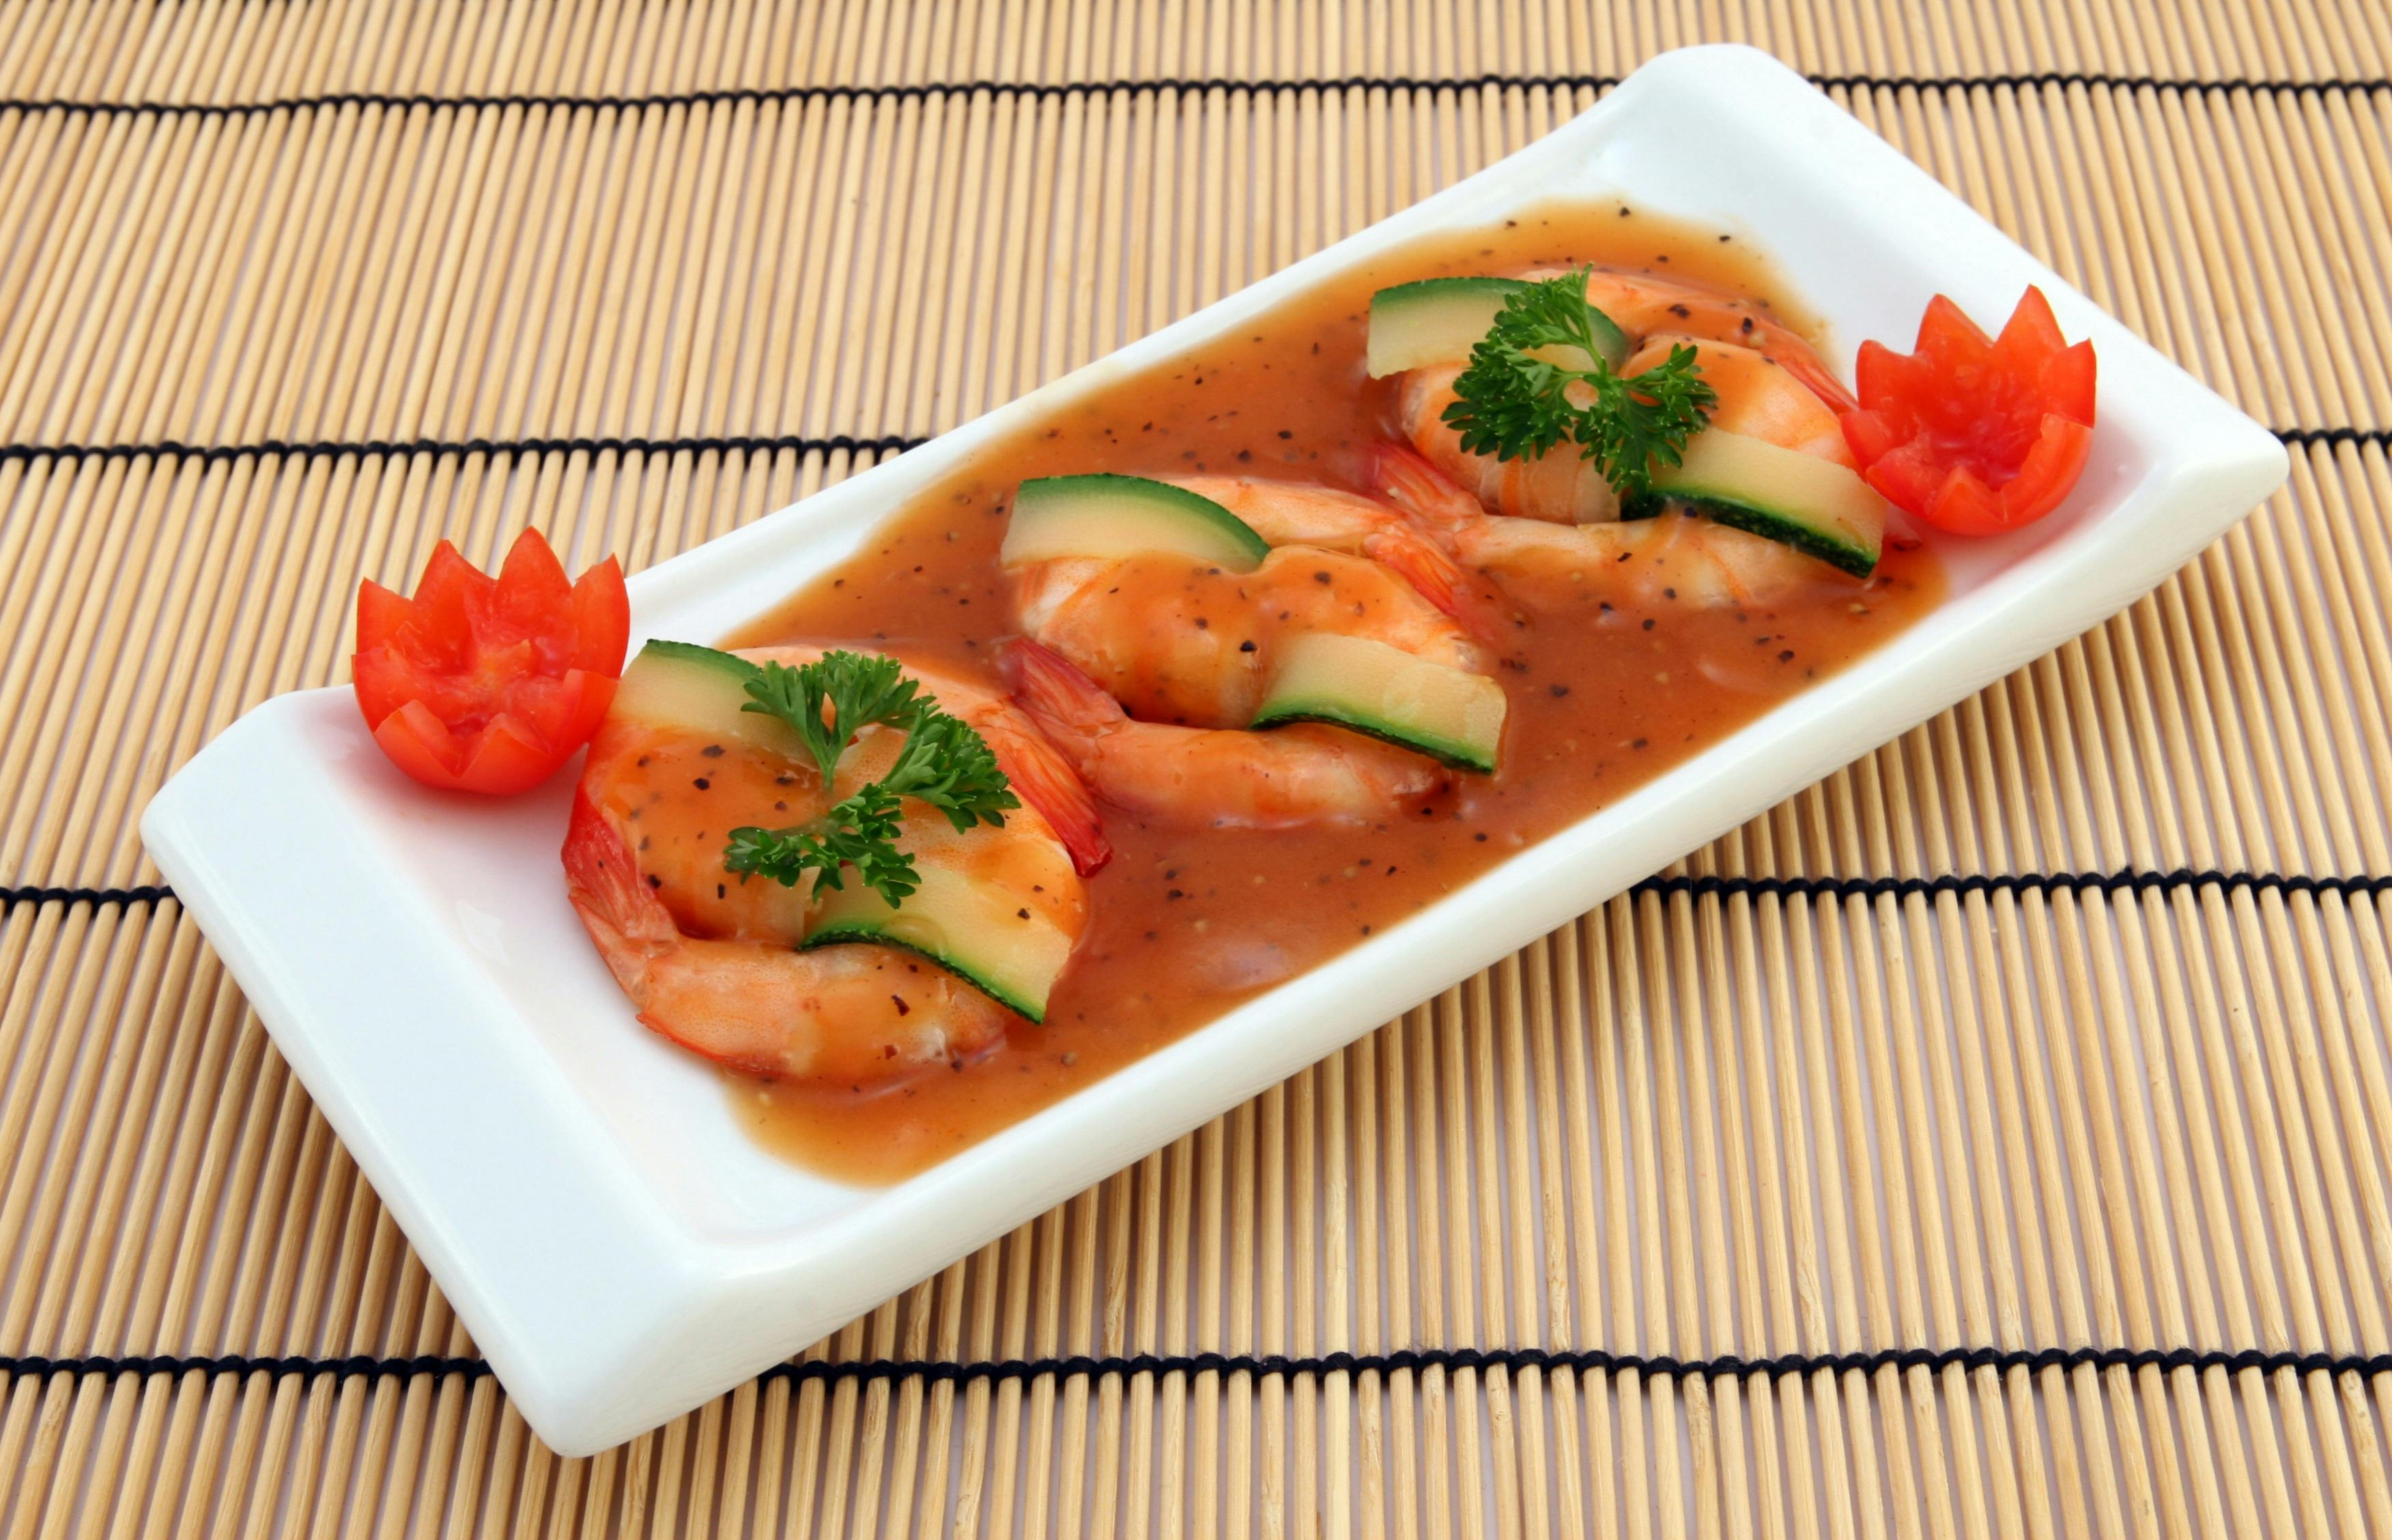 Plate of Shrimp With Sauce · Free Stock Photo